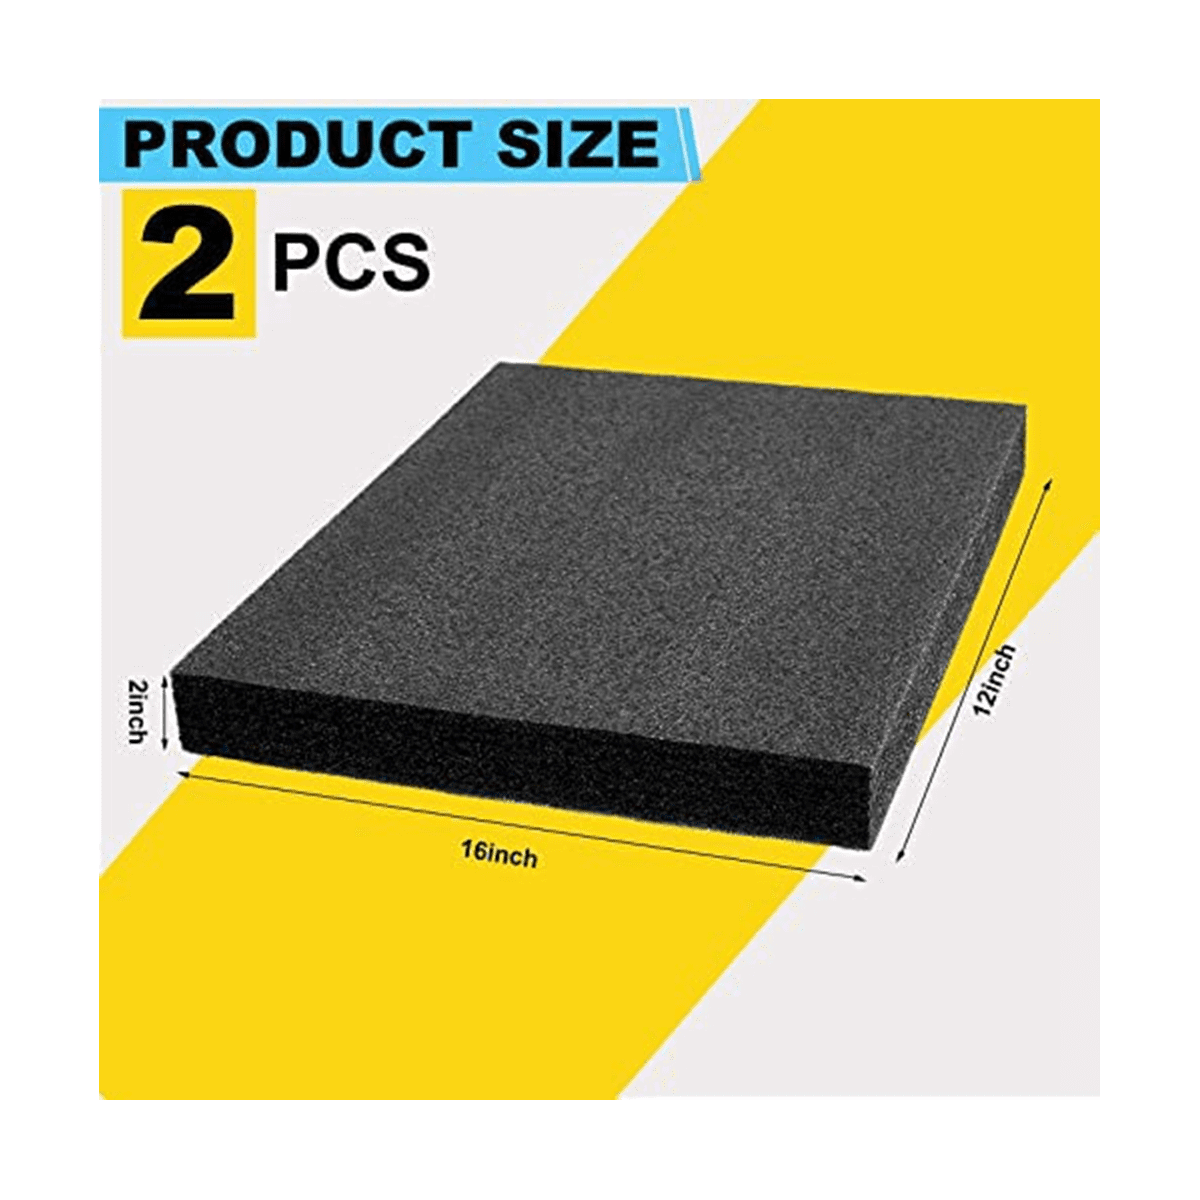 LEXININ 15 Pack 12 x 10 x 1/2 inch Foam Sheets, Polyethylene Foam Pads, Polyethylene Cushioning Sheets Foam Sheets for Moving, Packing, Crafting